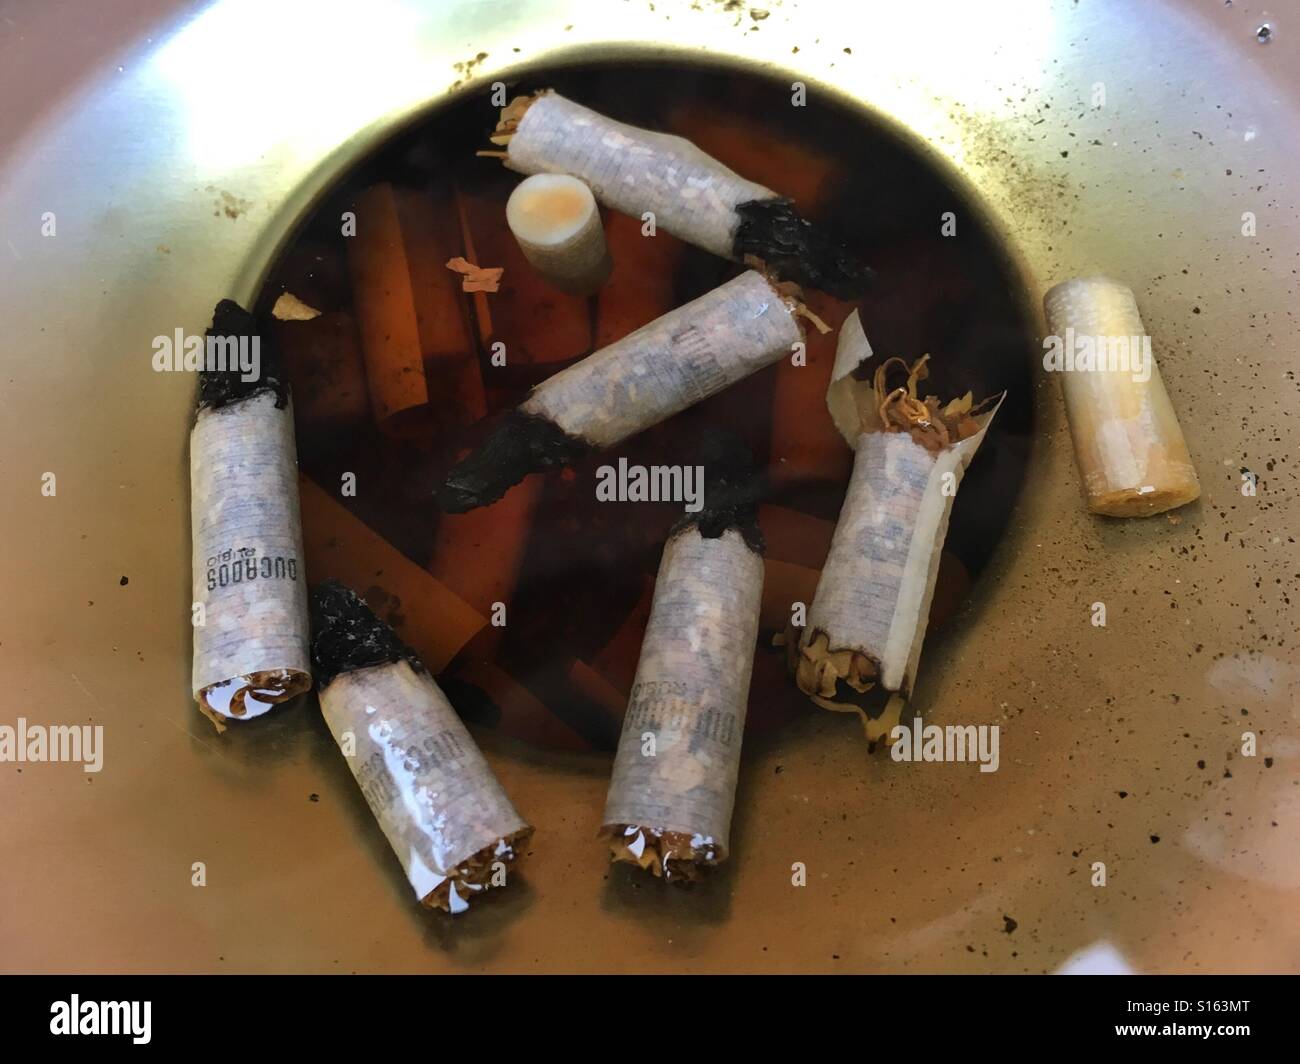 Cigarette butts floating in flooded ashtray Stock Photo